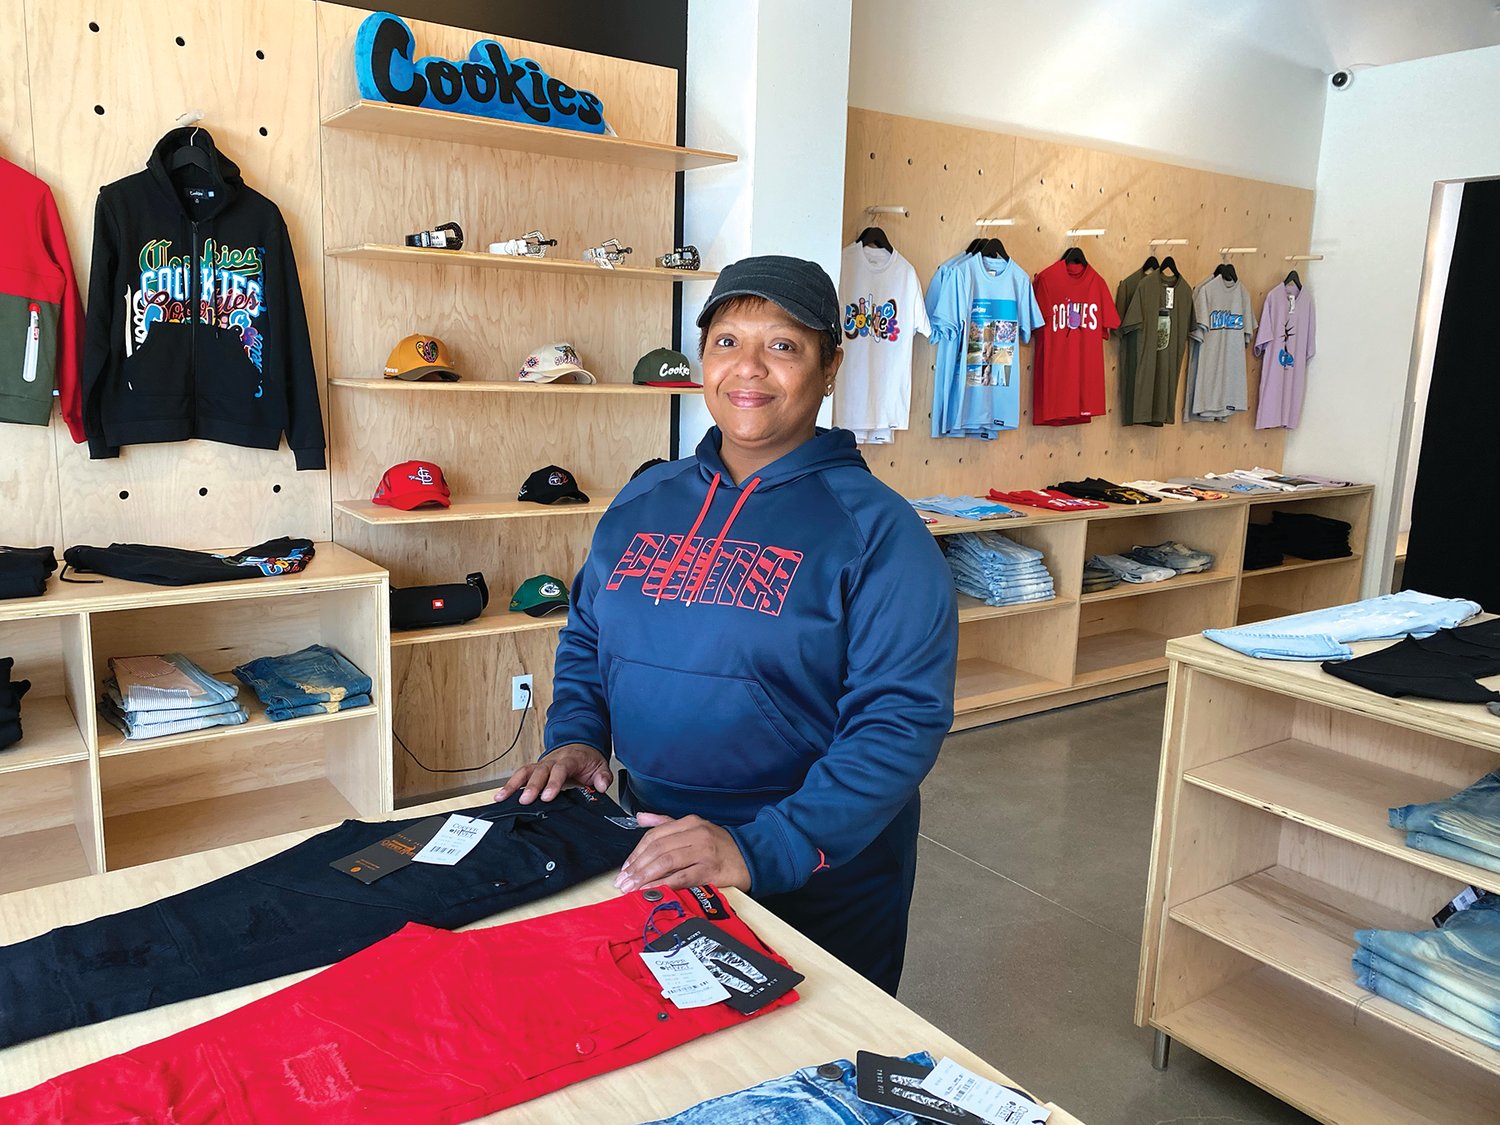 Urban29 owner Joyce Sanders stands in her new store at 633 University Ave. W., in the new Frogtown Crossing building. (Photo by Tesha M. Christensen)